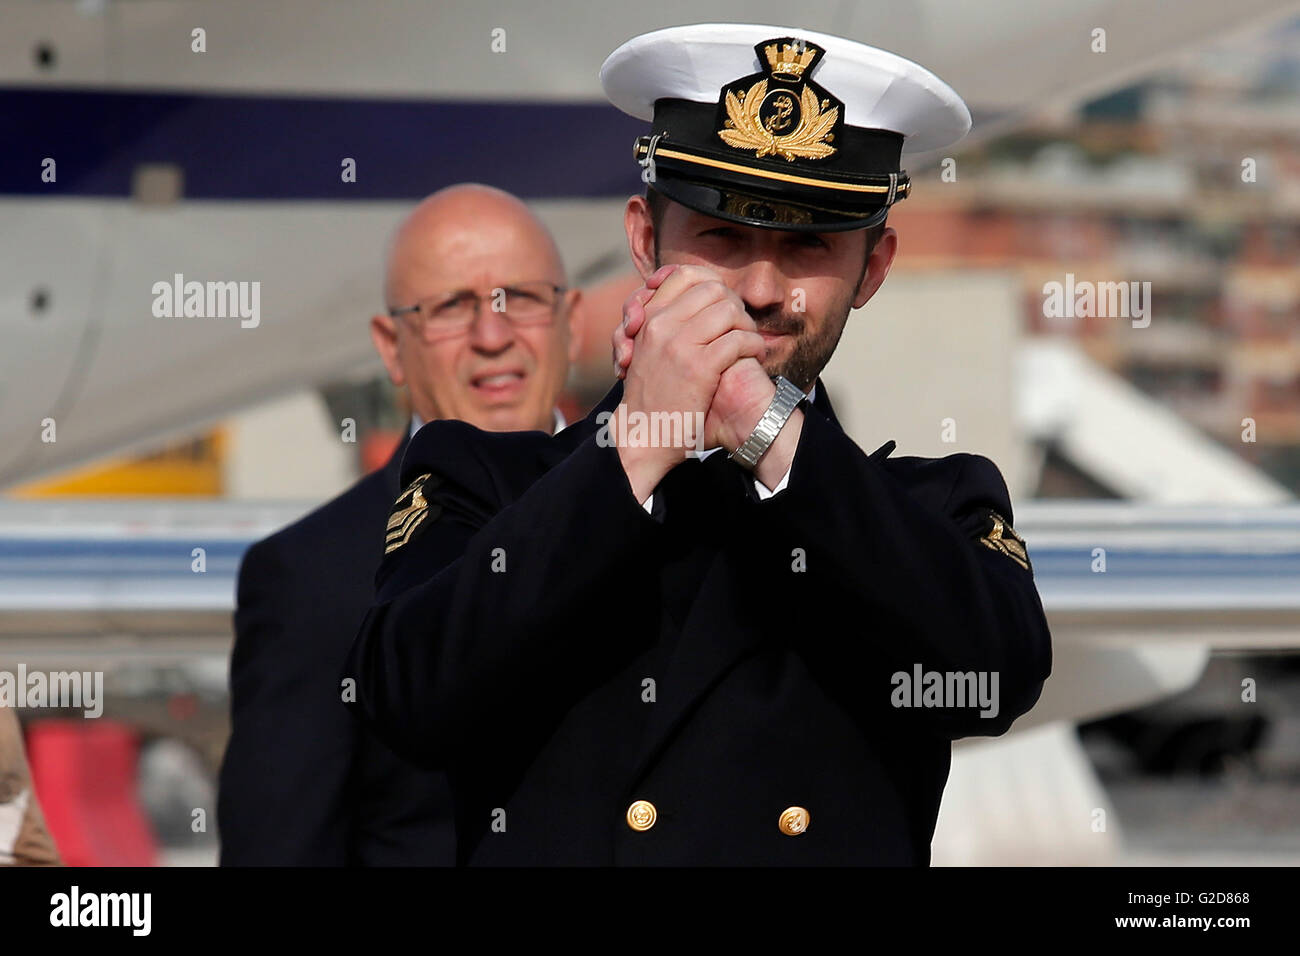 Salvatore Girone, making a sign of victory Rome 28th May 2016. Return of Salvatore Girone, the non-comissioned officer of the Italian Navy, arrested in India under the accusation of murder. Photo Samantha Zucchi Insidefoto Stock Photo